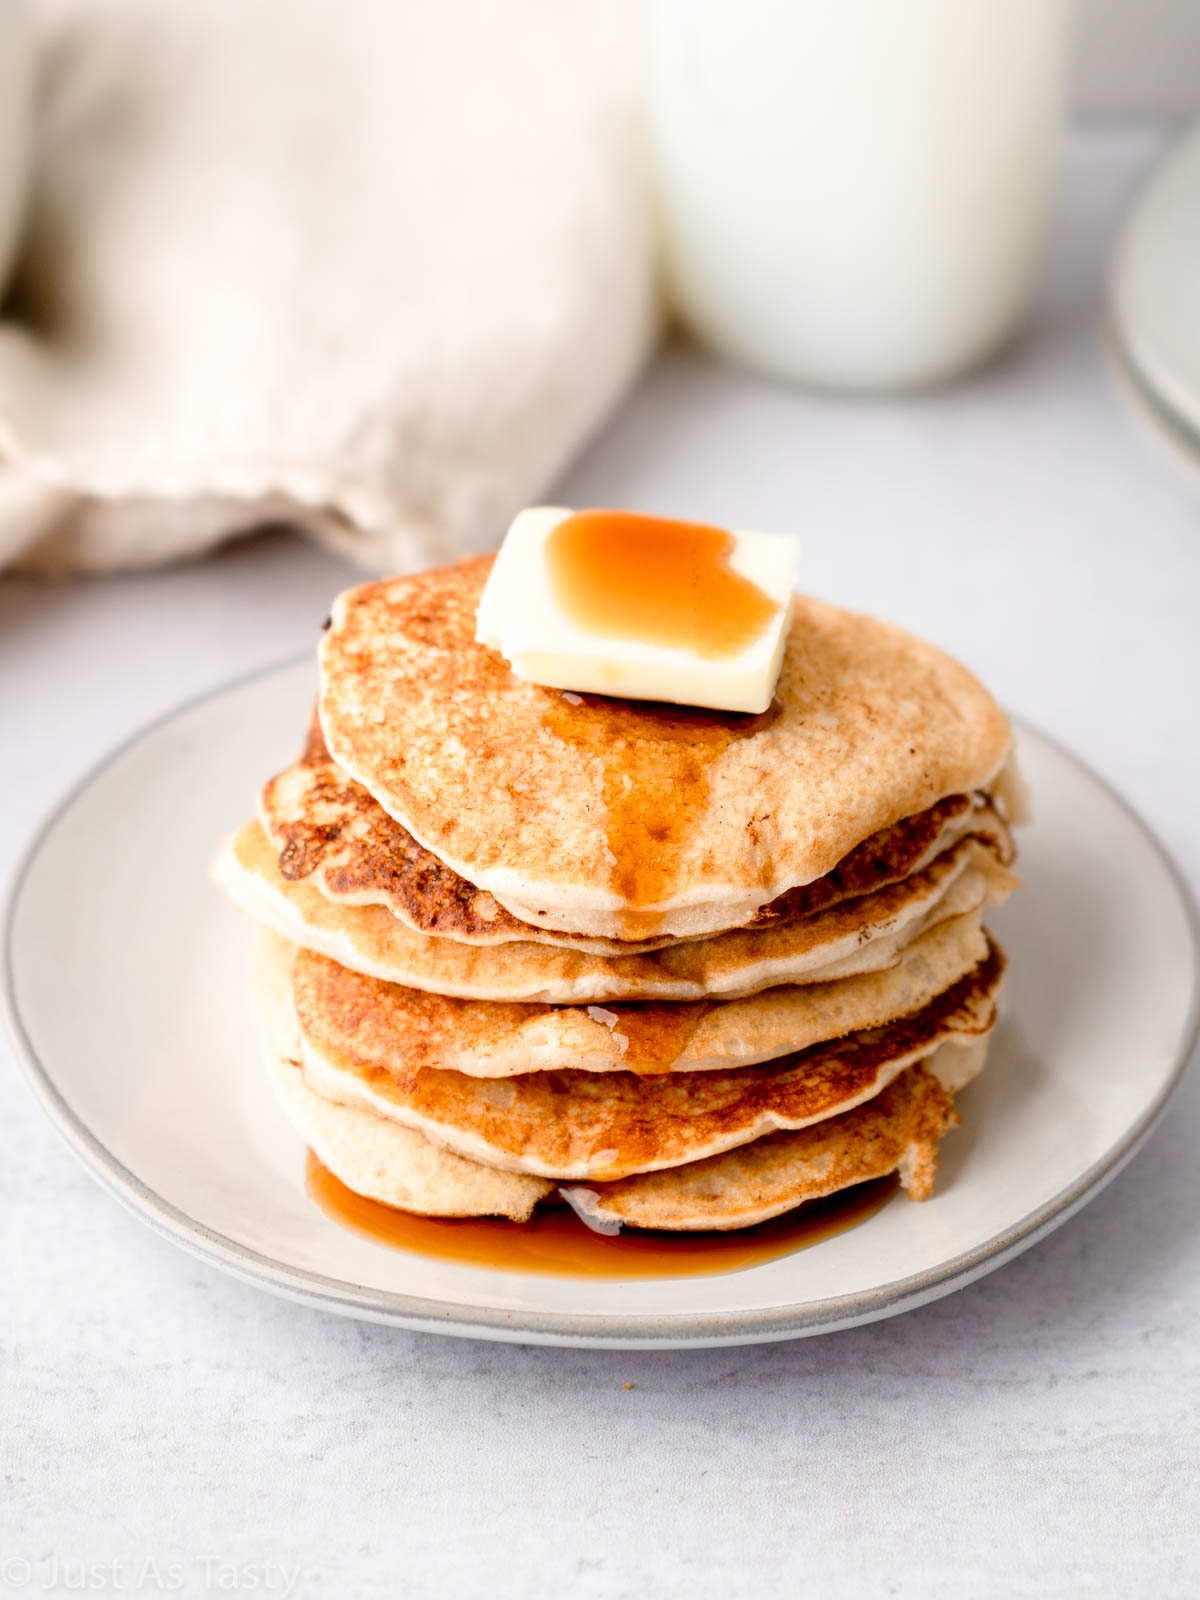 Stack of gluten free pancakes on a plate.